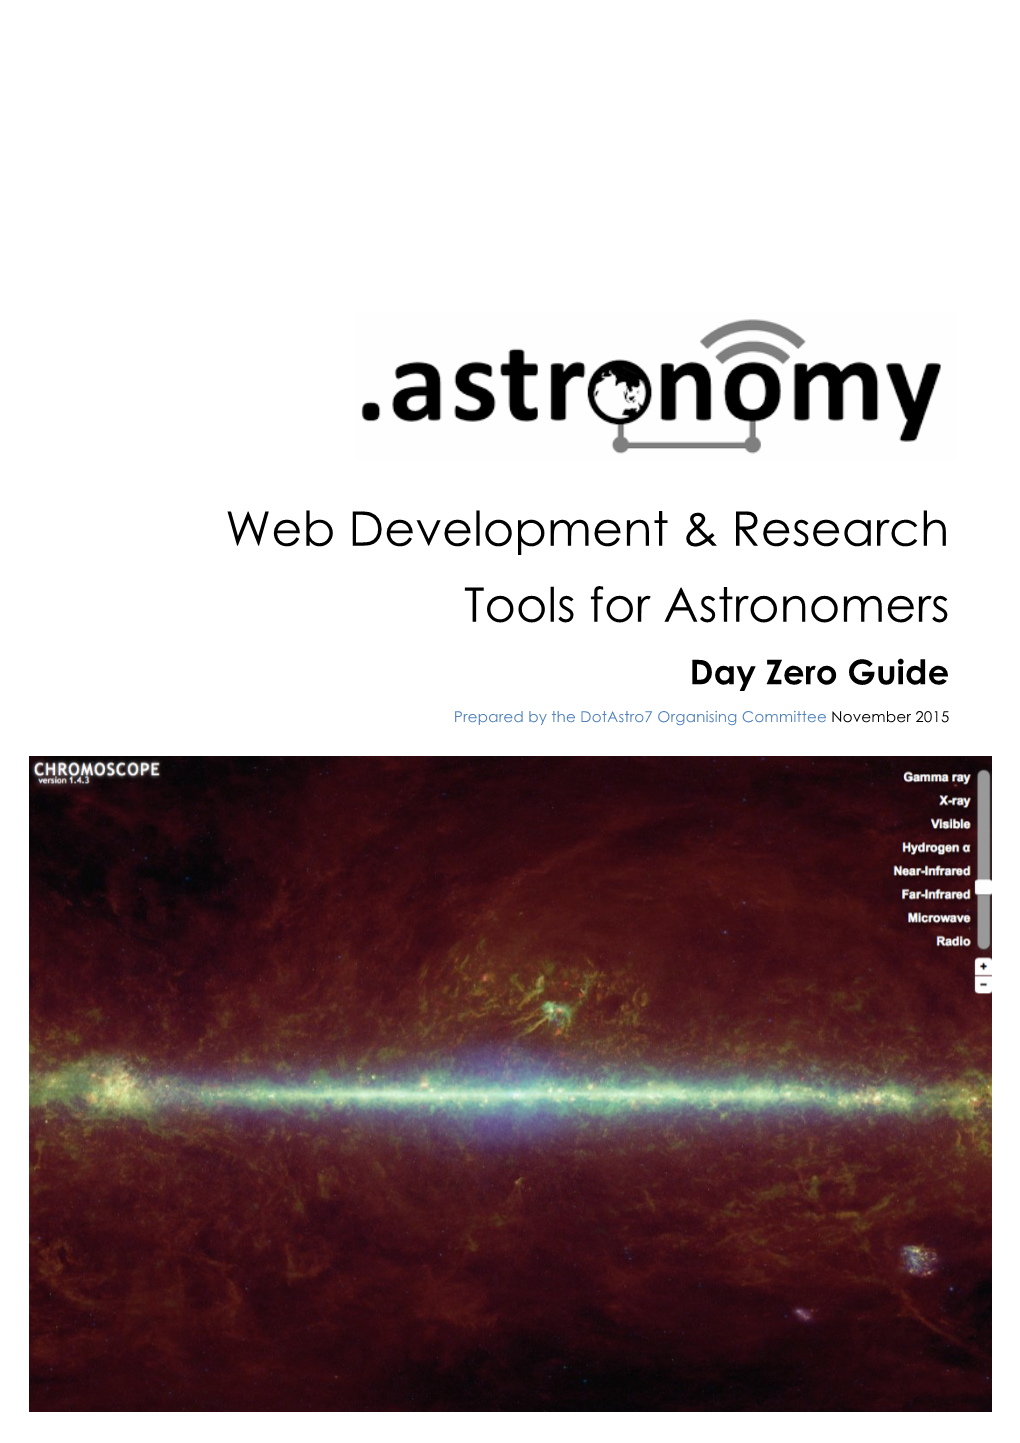 Web Development & Research Tools for Astronomers (PDF, 2MB)